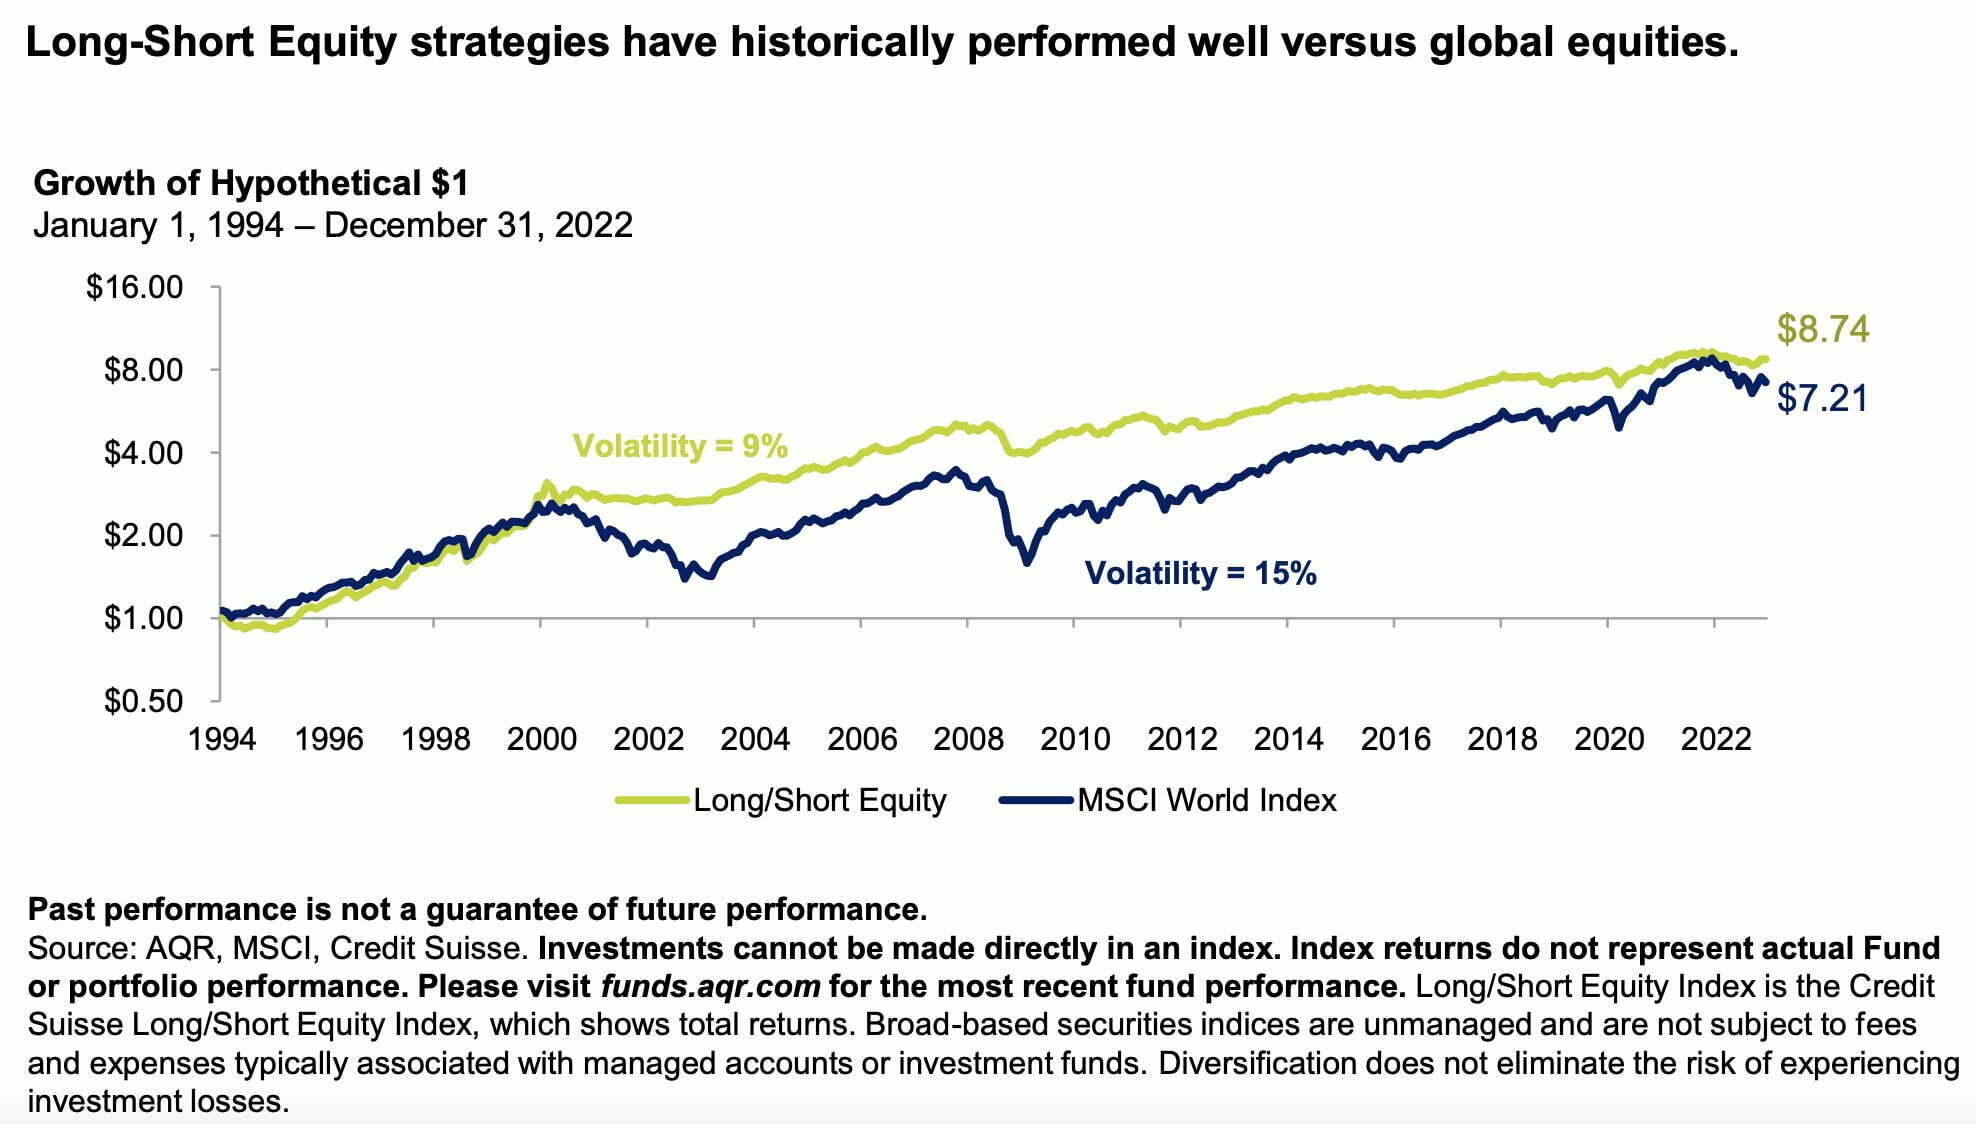 Long-Short Equity Strategies Have Historically Performed Well Versus Global Equities 